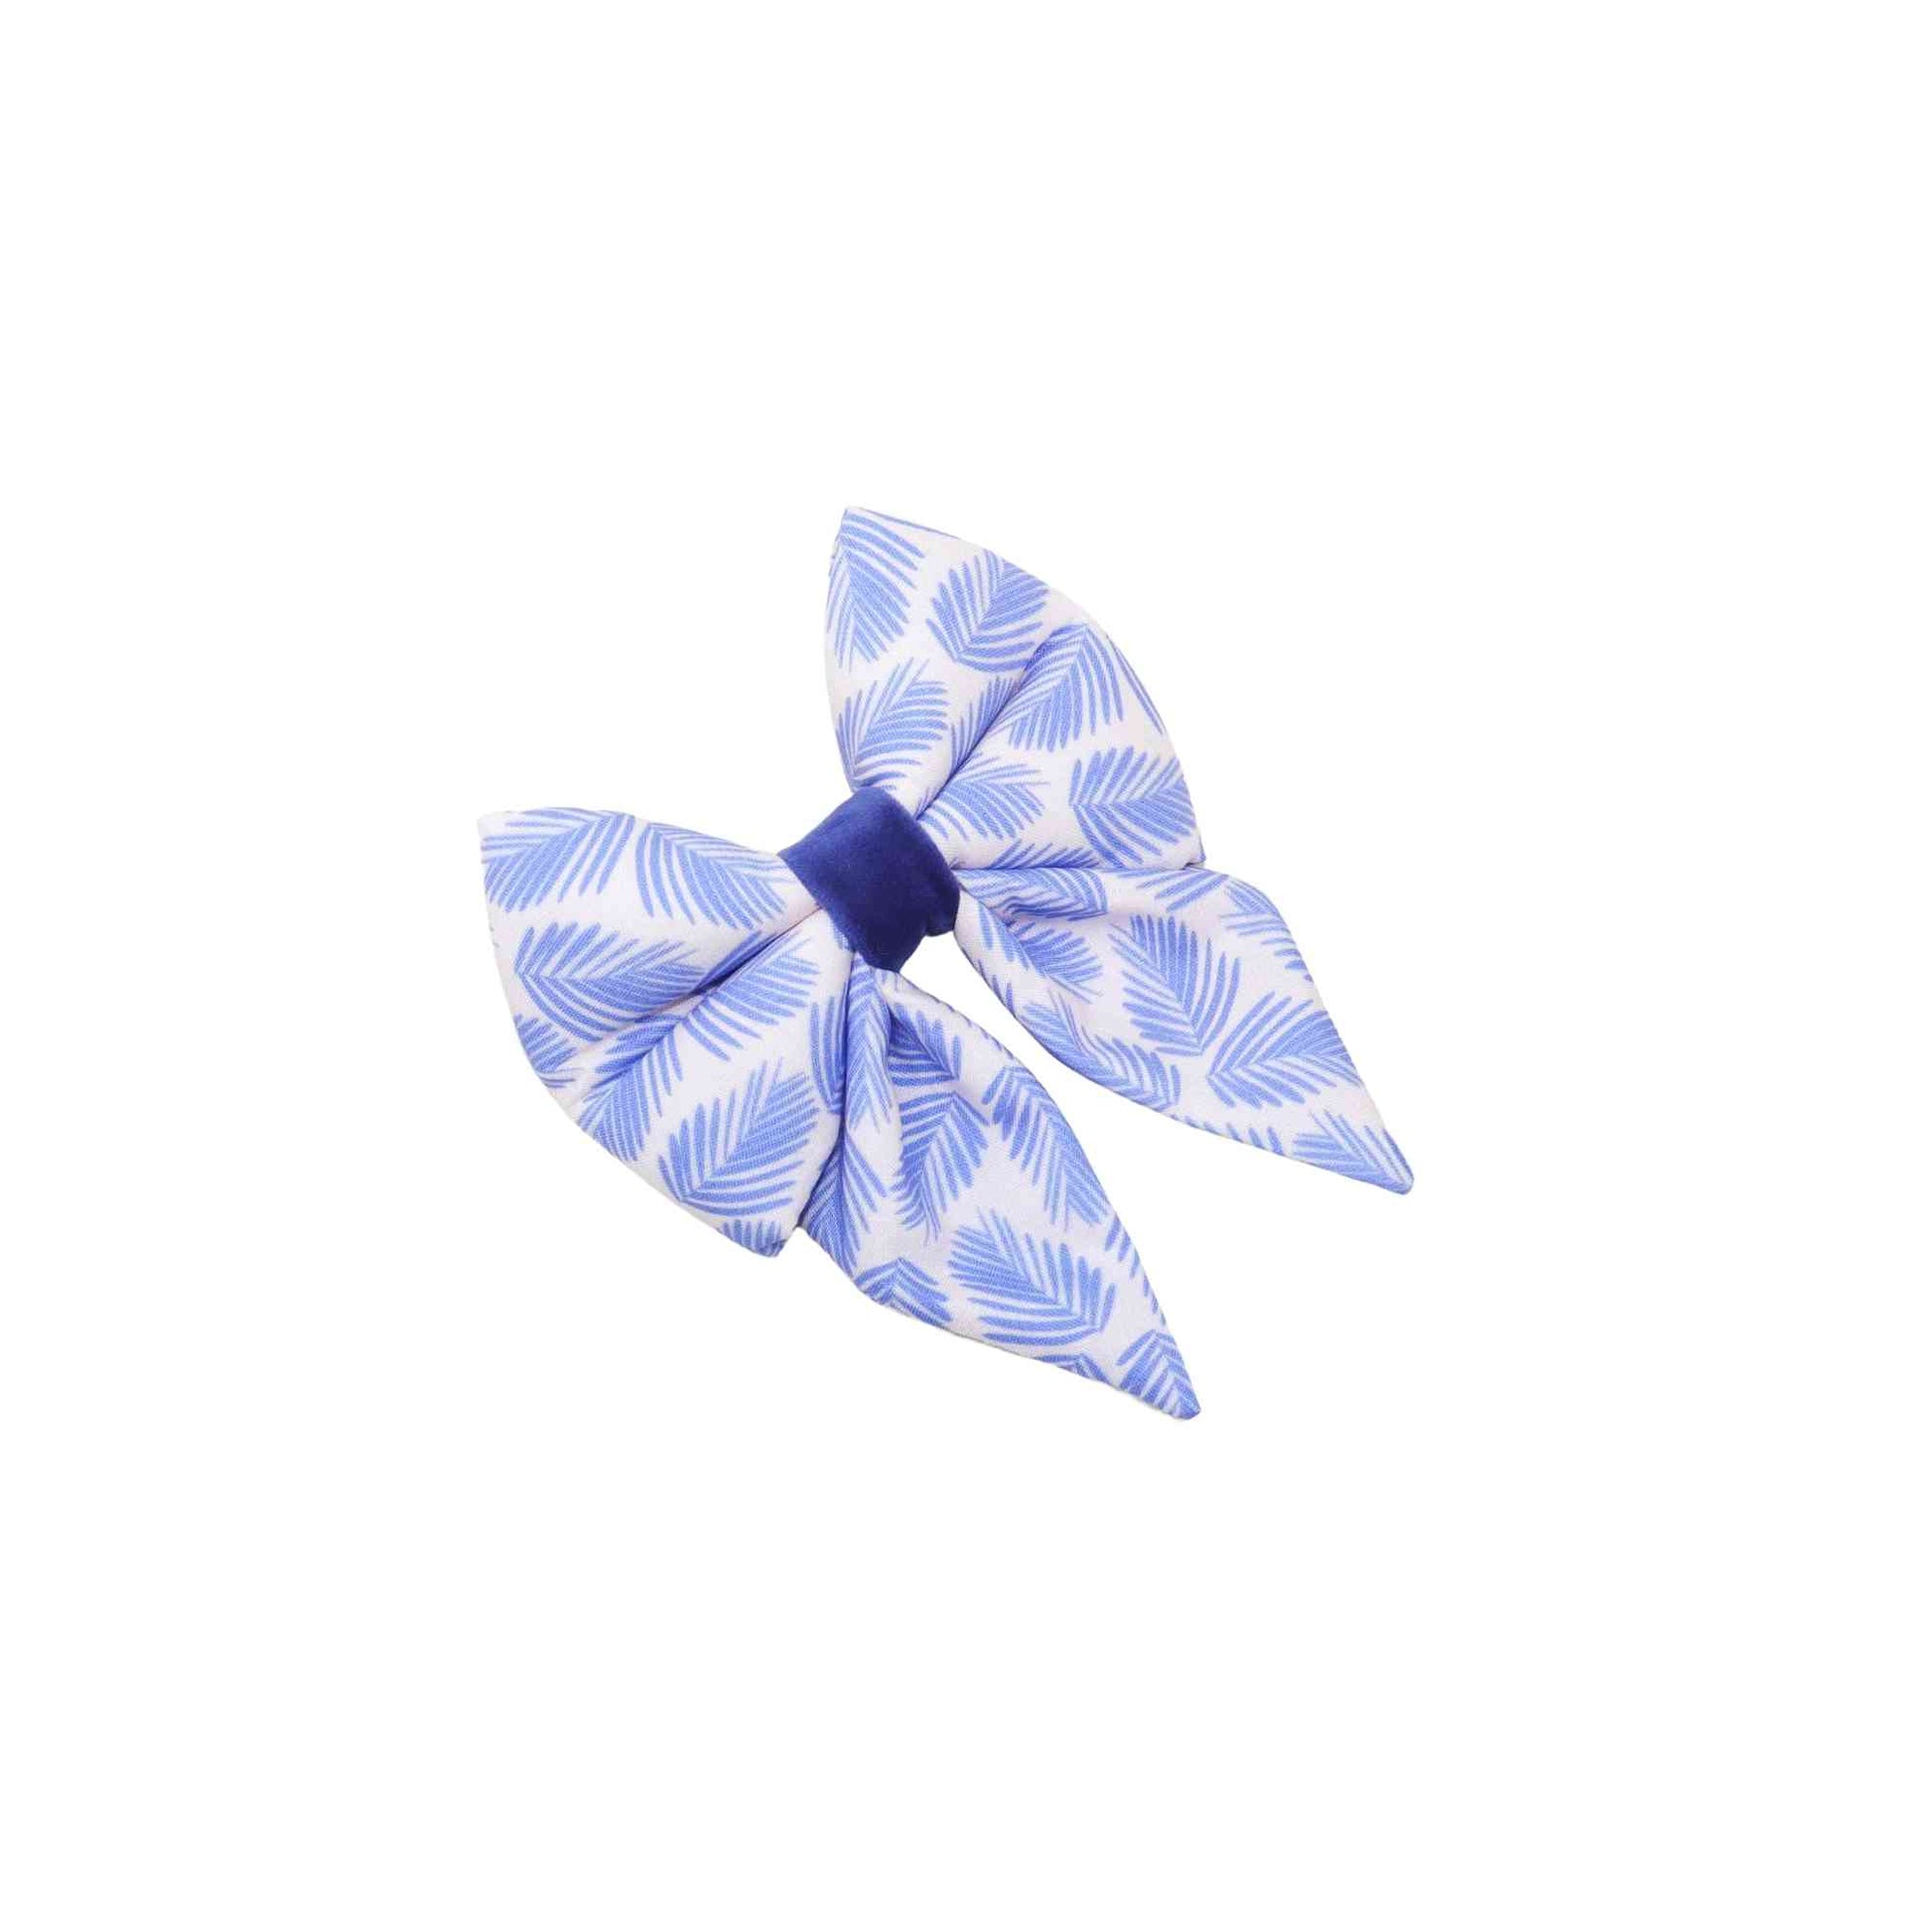 Add a touch of tropical paradise to your pup's summer wardrobe with our Blue Palms Tropical Dog Sailor Bow! This handmade bow is designed to slip easily over your pup's collar and comes in a range of sizes to fit dogs of all breeds and sizes. Made with high-quality fabric and expert craftsmanship, this bow is both durable and comfortable. The blue palms print is perfect for the summertime and adds a fun and vibrant touch to any outfit.